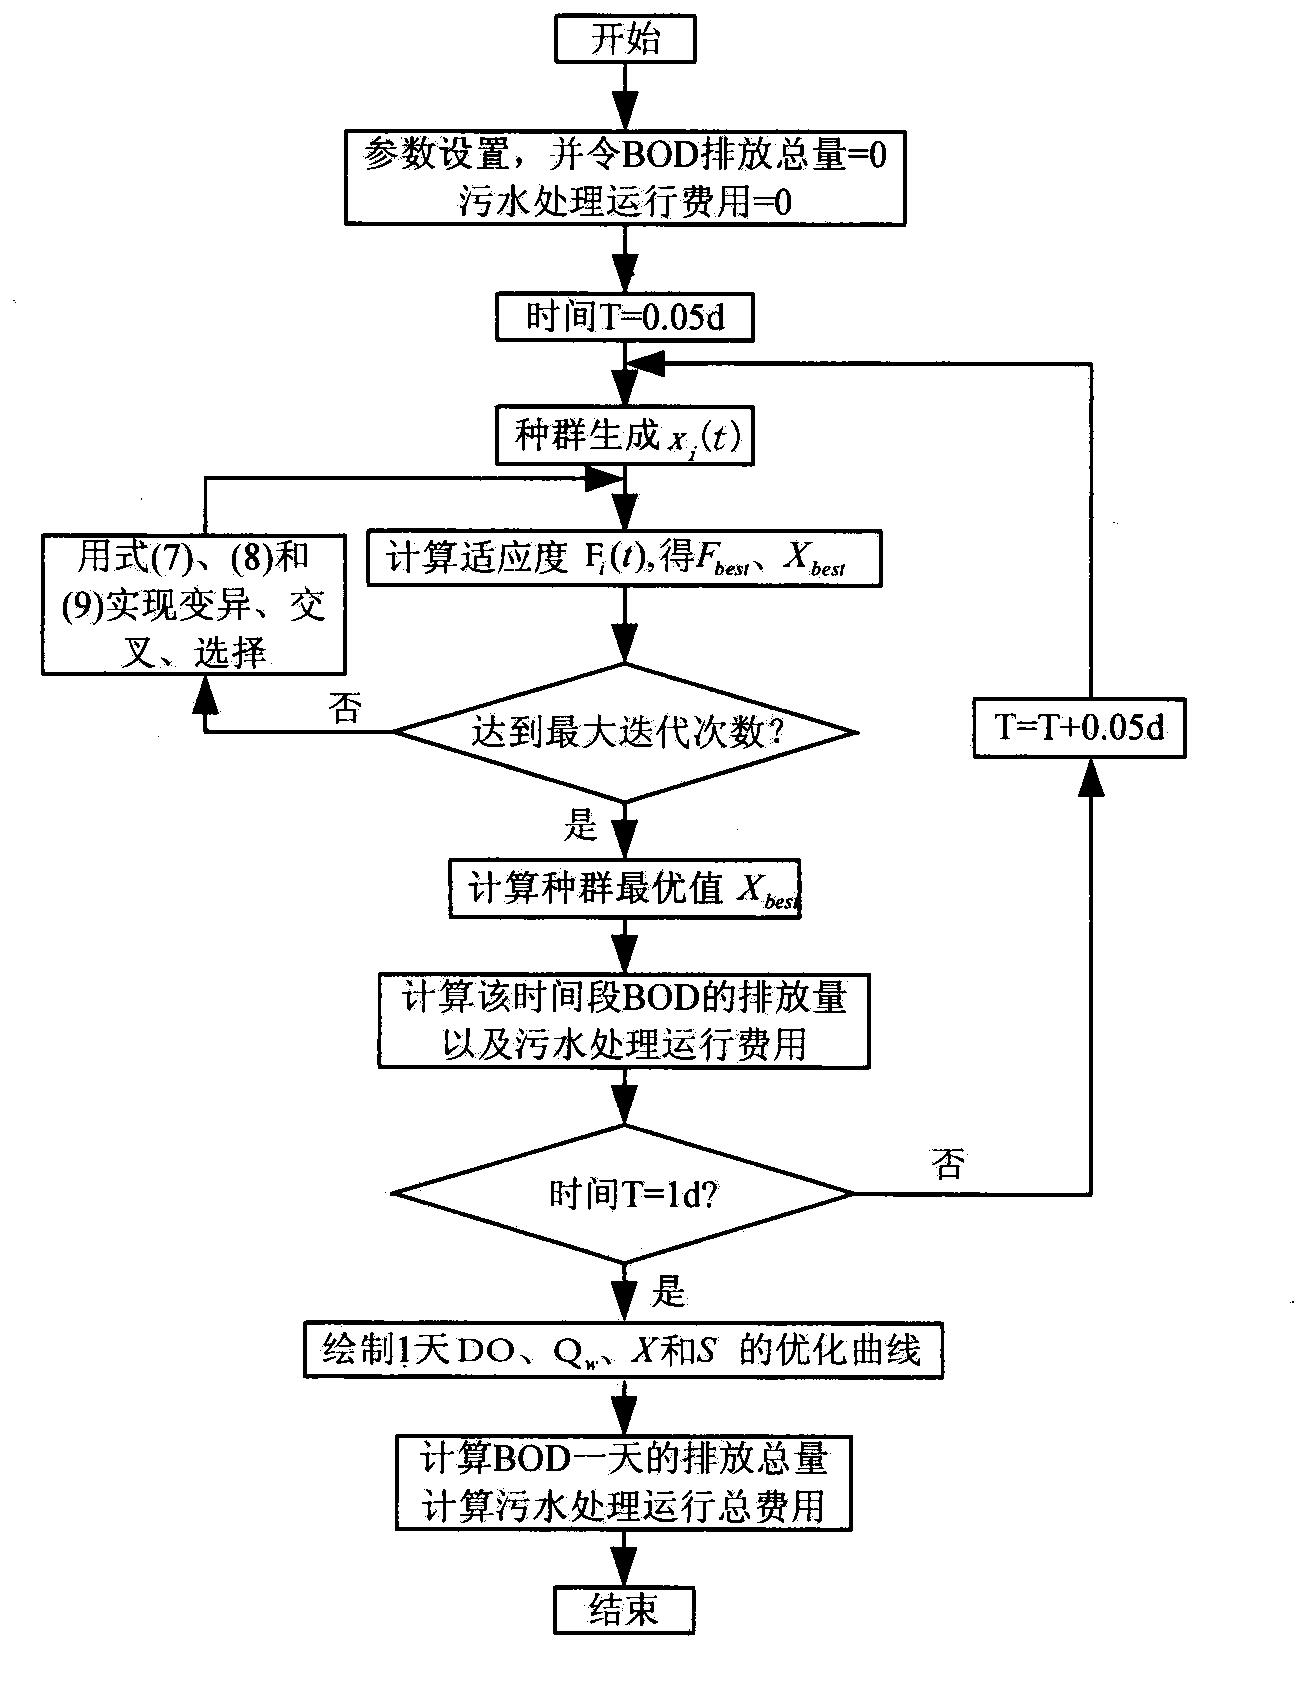 Dissolved-oxygen control method based on improved differential algorithm